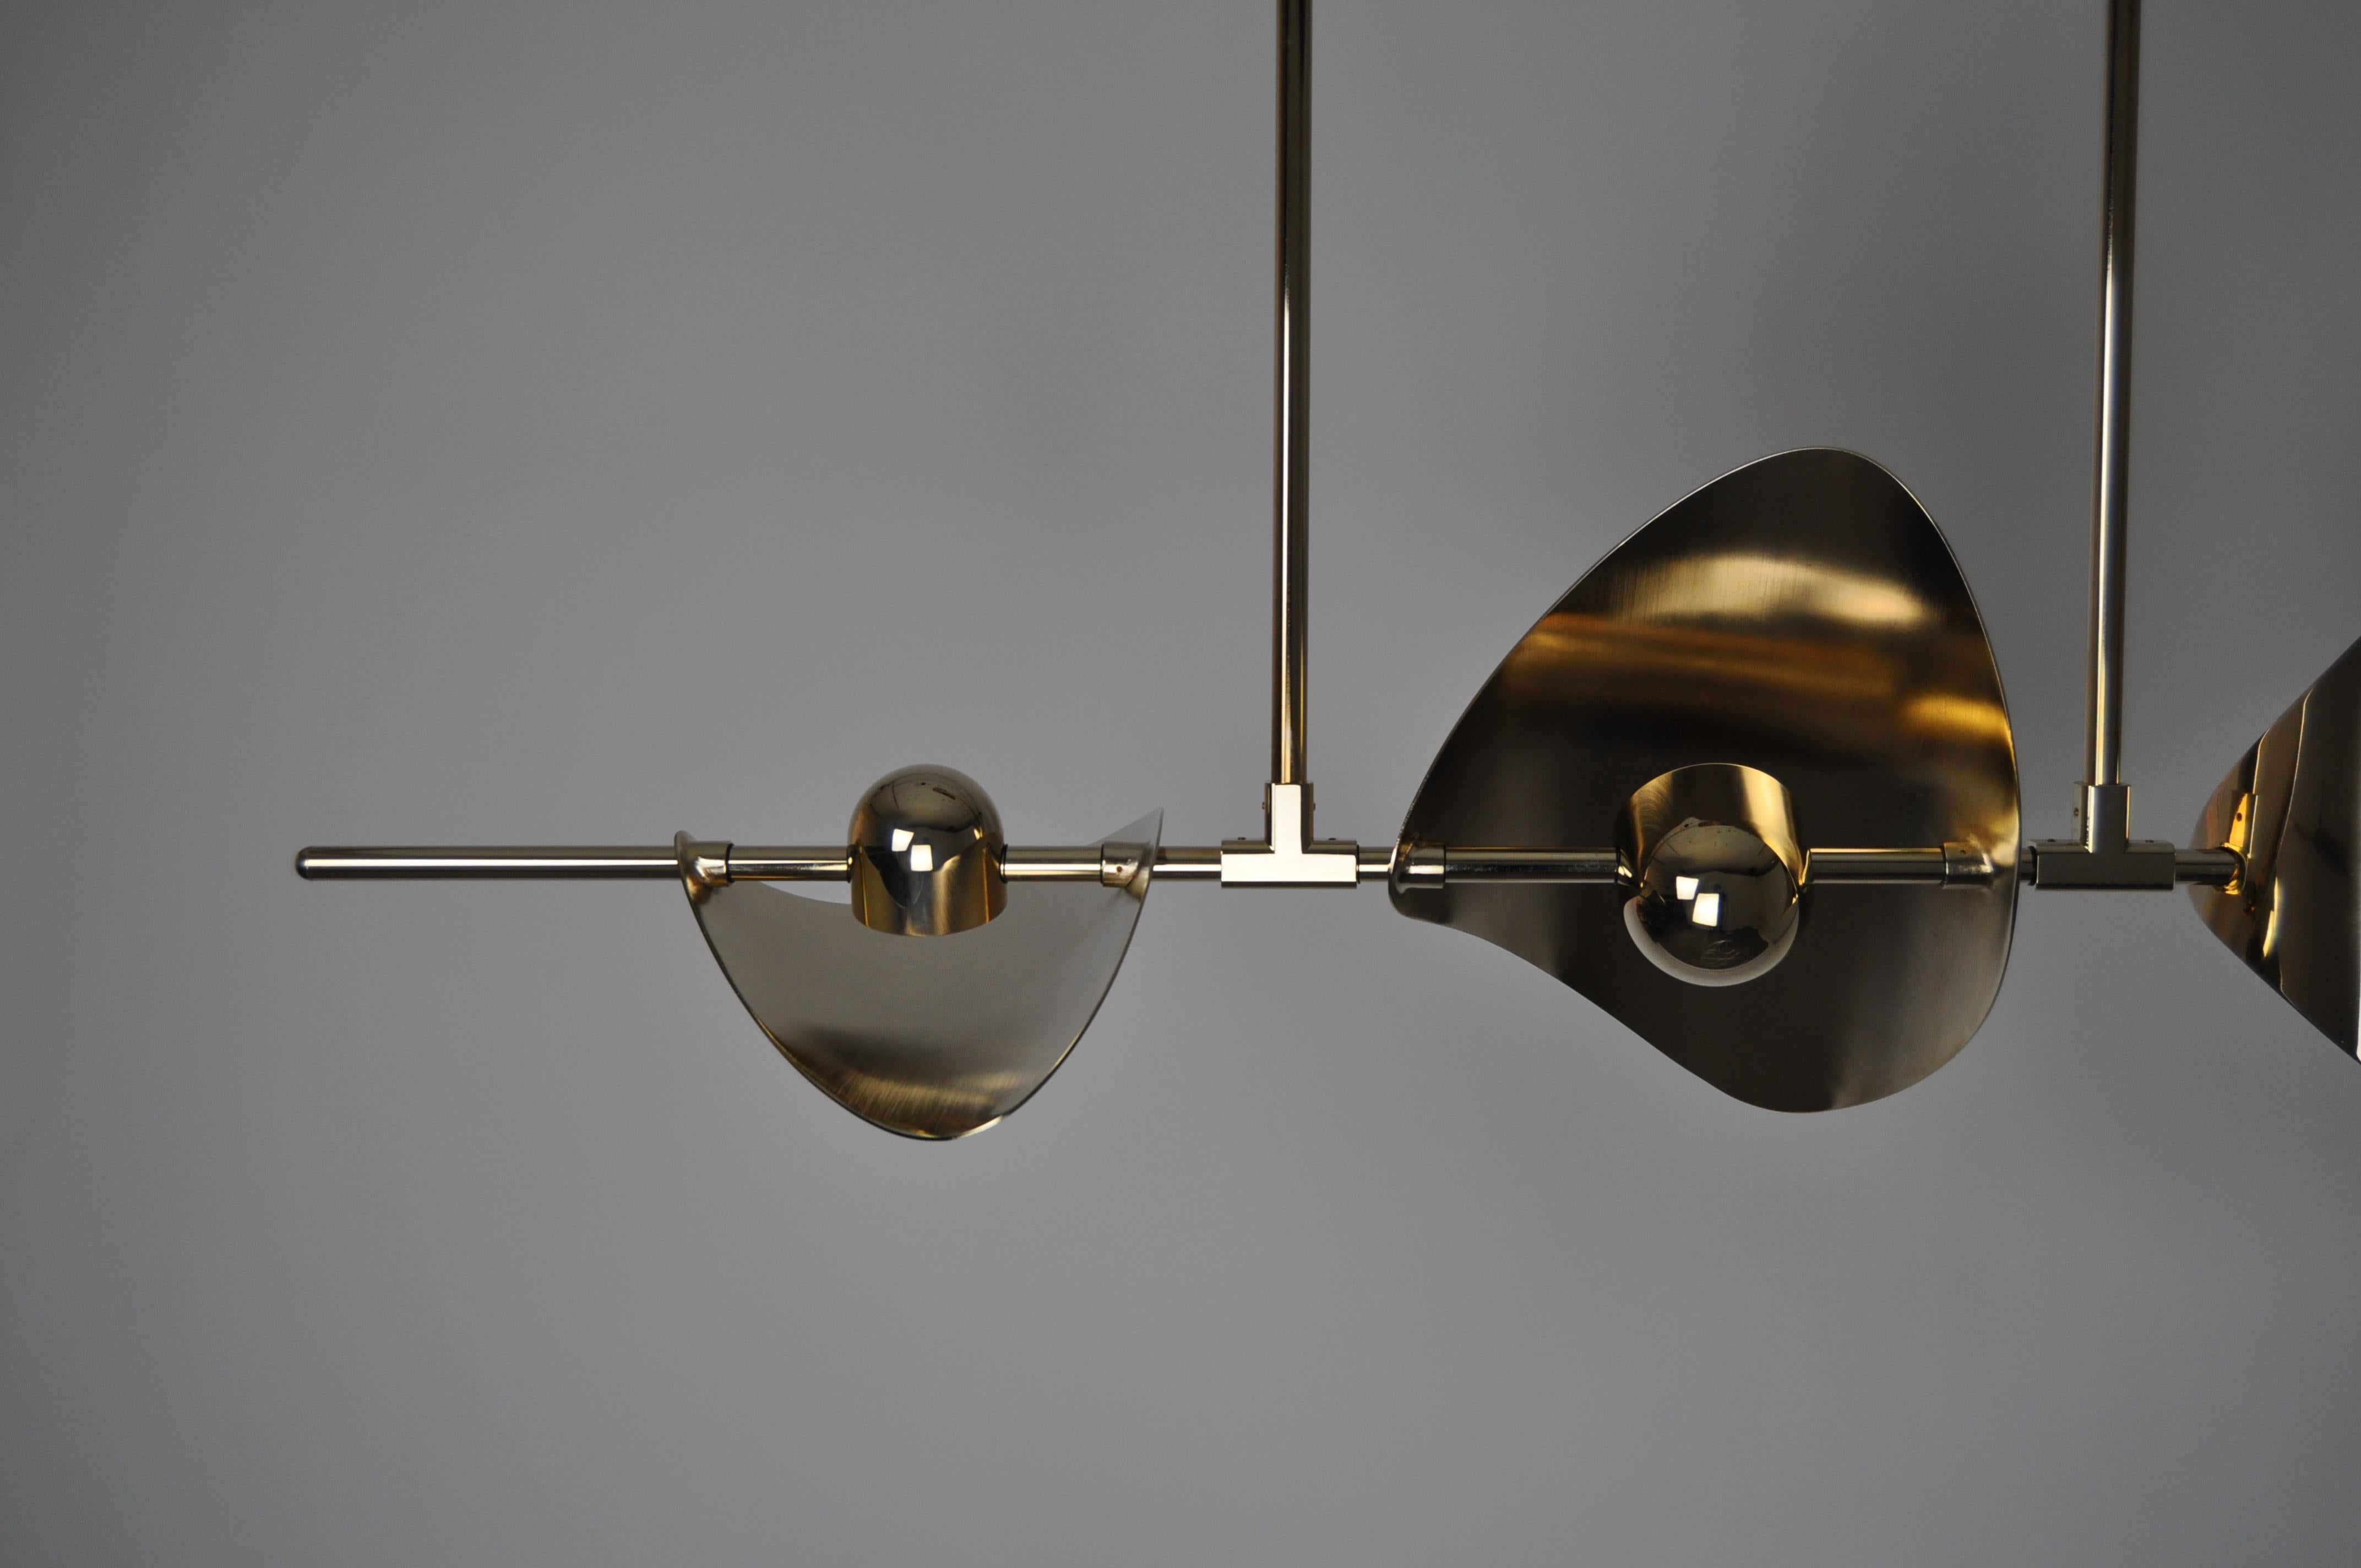 Bonnie Config 3 Contemporary LED Chandelier, Brass or Nickel, Large, Art In New Condition For Sale In Torslanda, SE